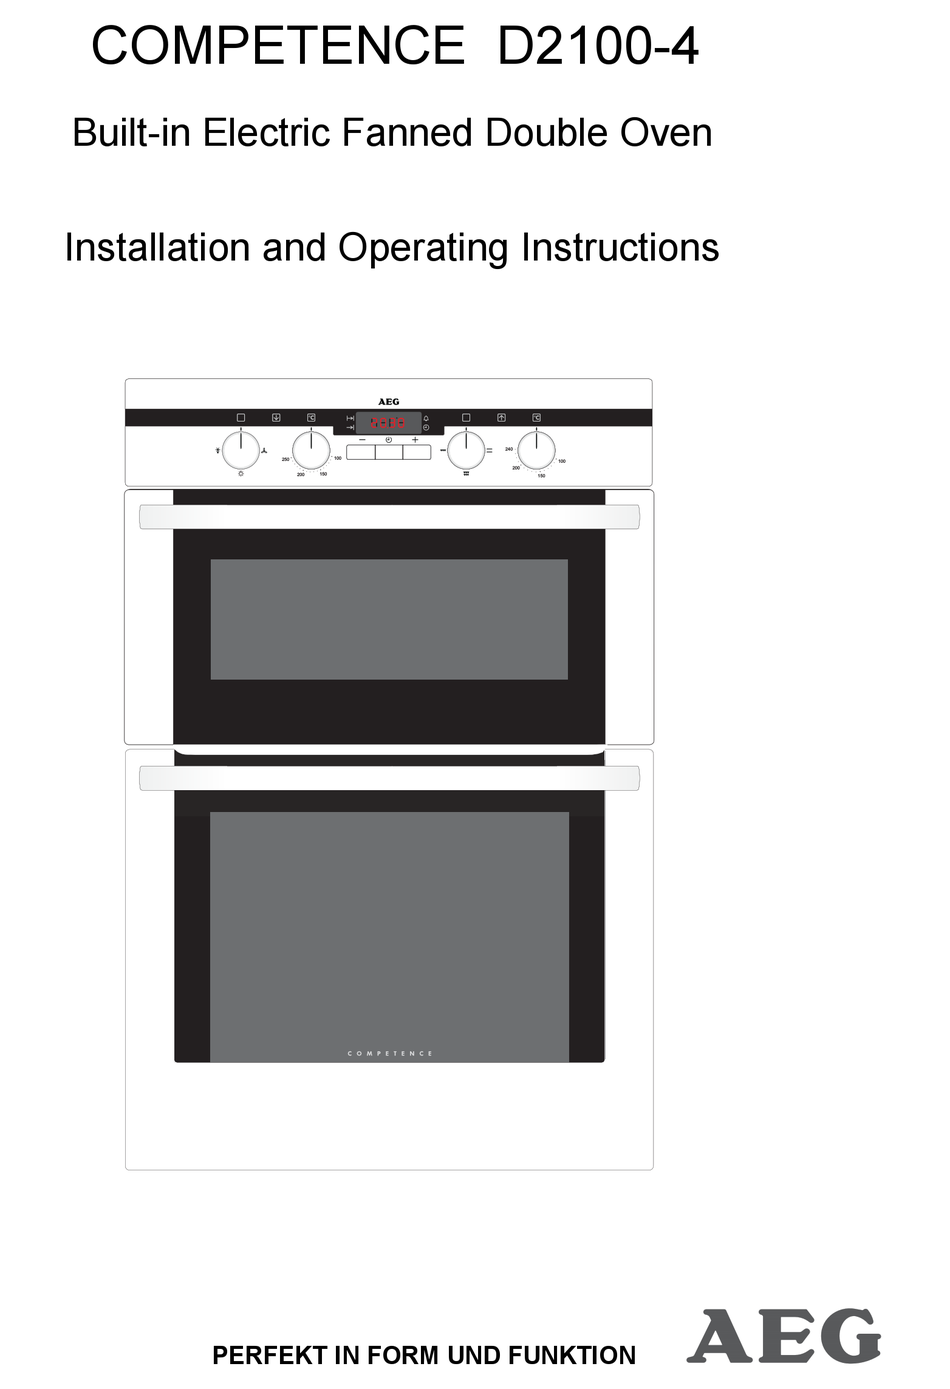 COMPETENCE D2100-4 INSTALLATION OPERATING MANUAL Pdf Download | ManualsLib